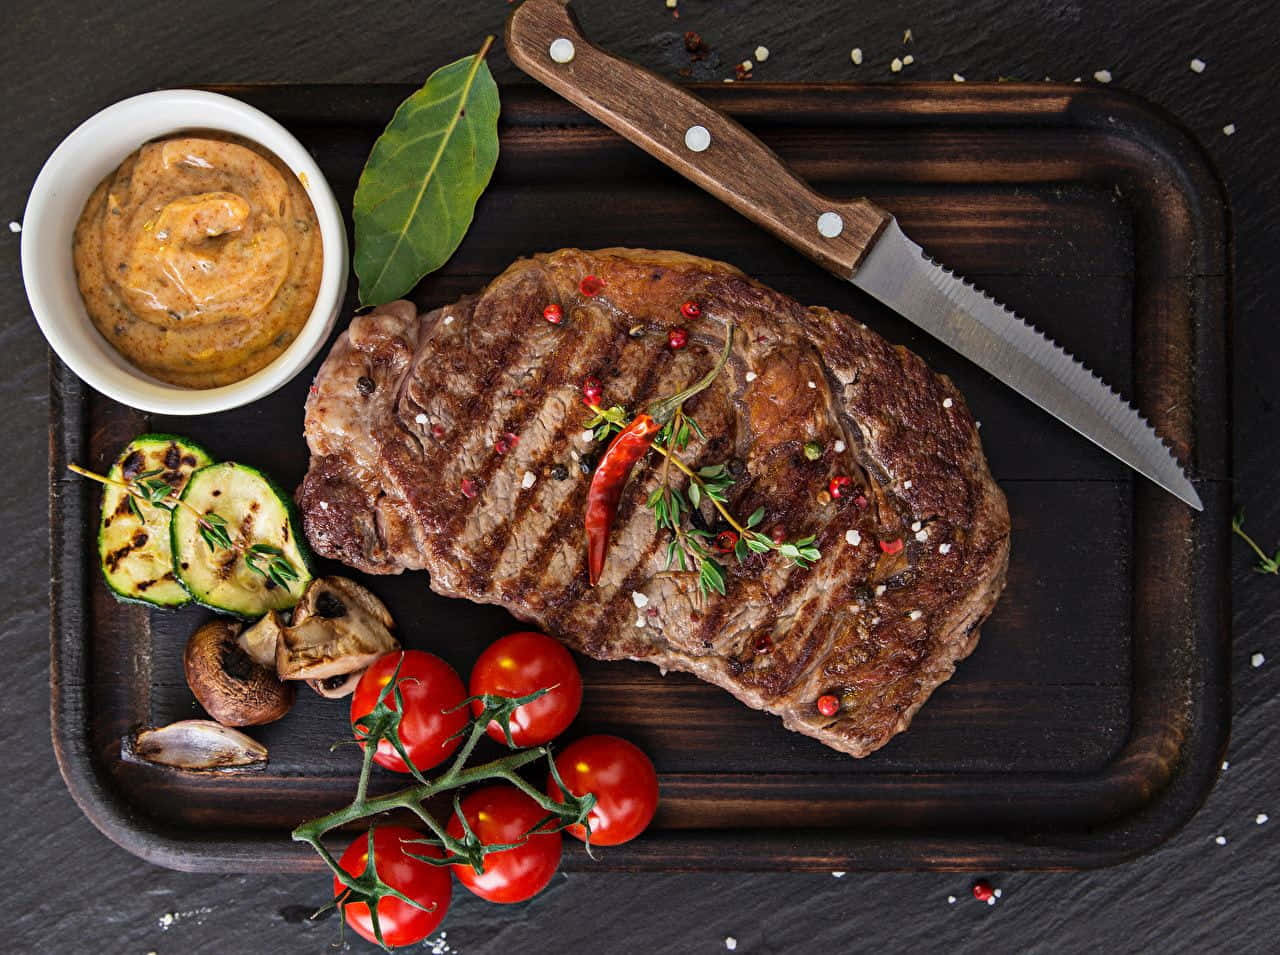 Steak On A Wooden Tray With Vegetables And Sauce